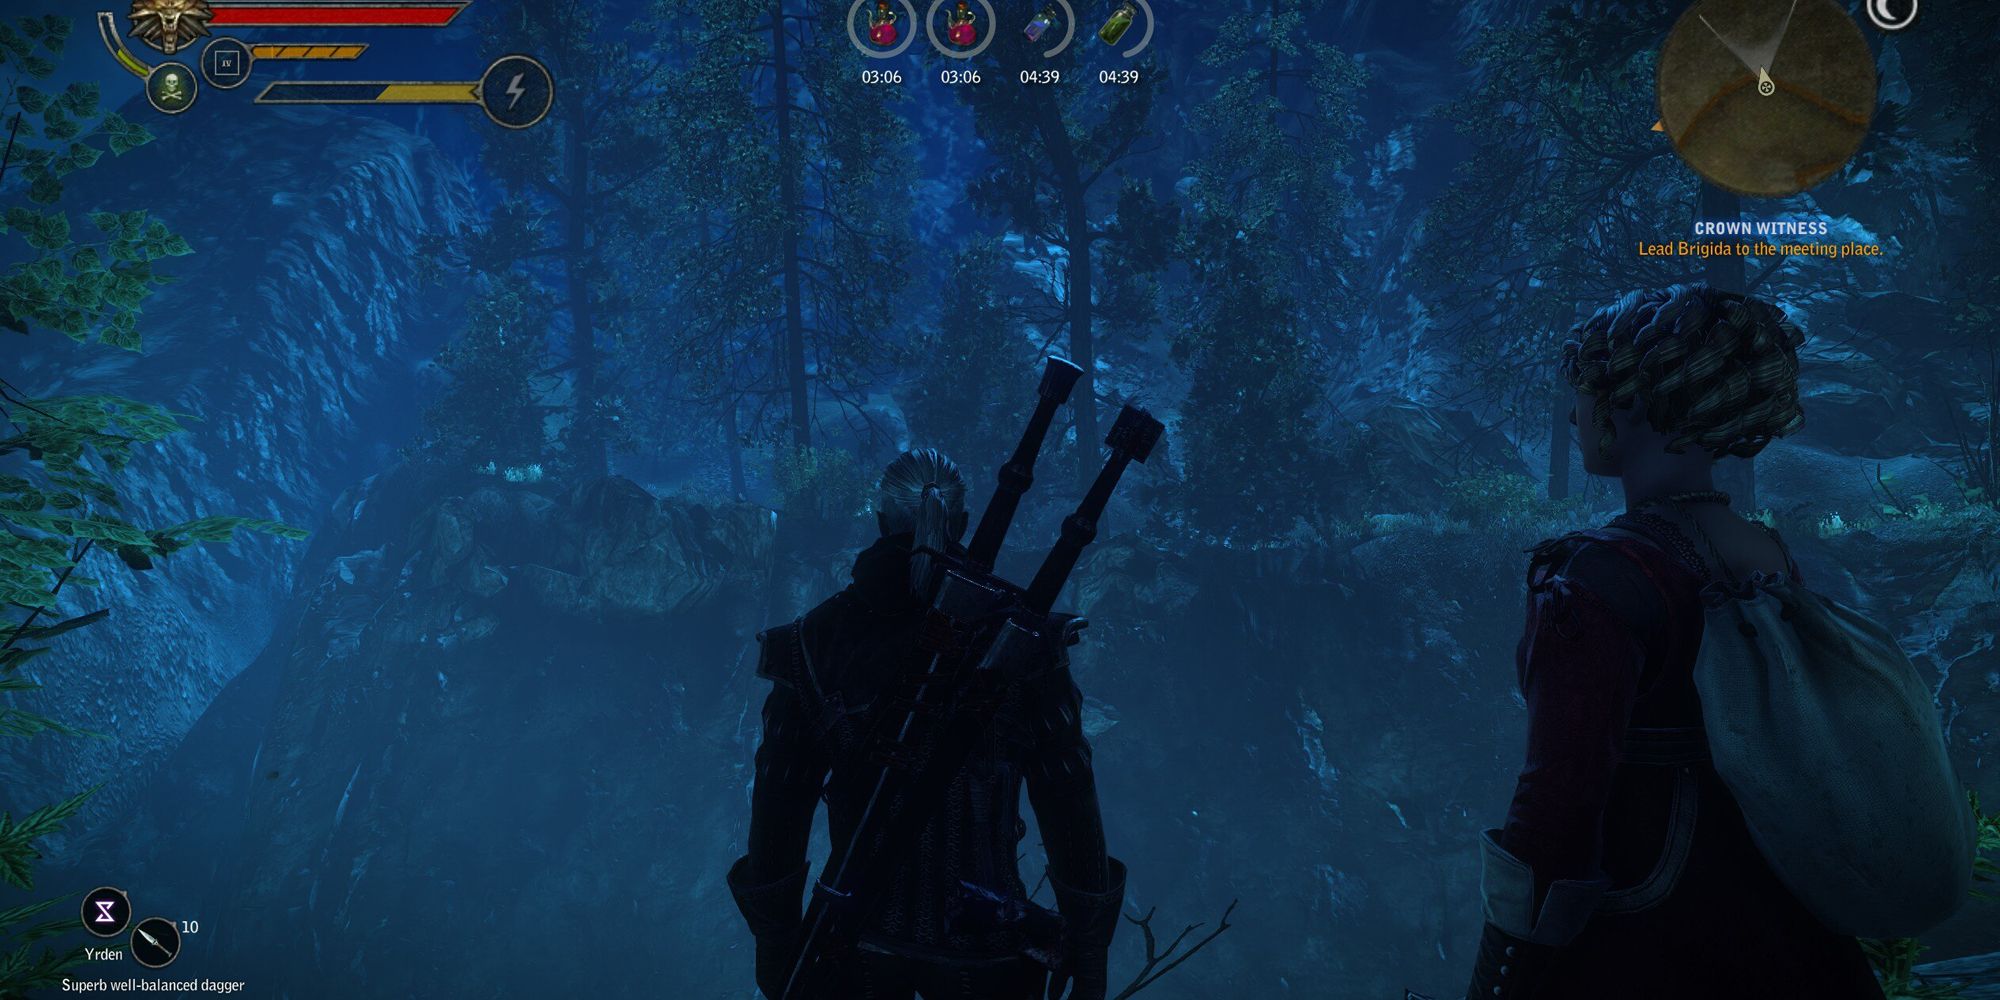 The Witcher 2, Geralt leading someone to safety.